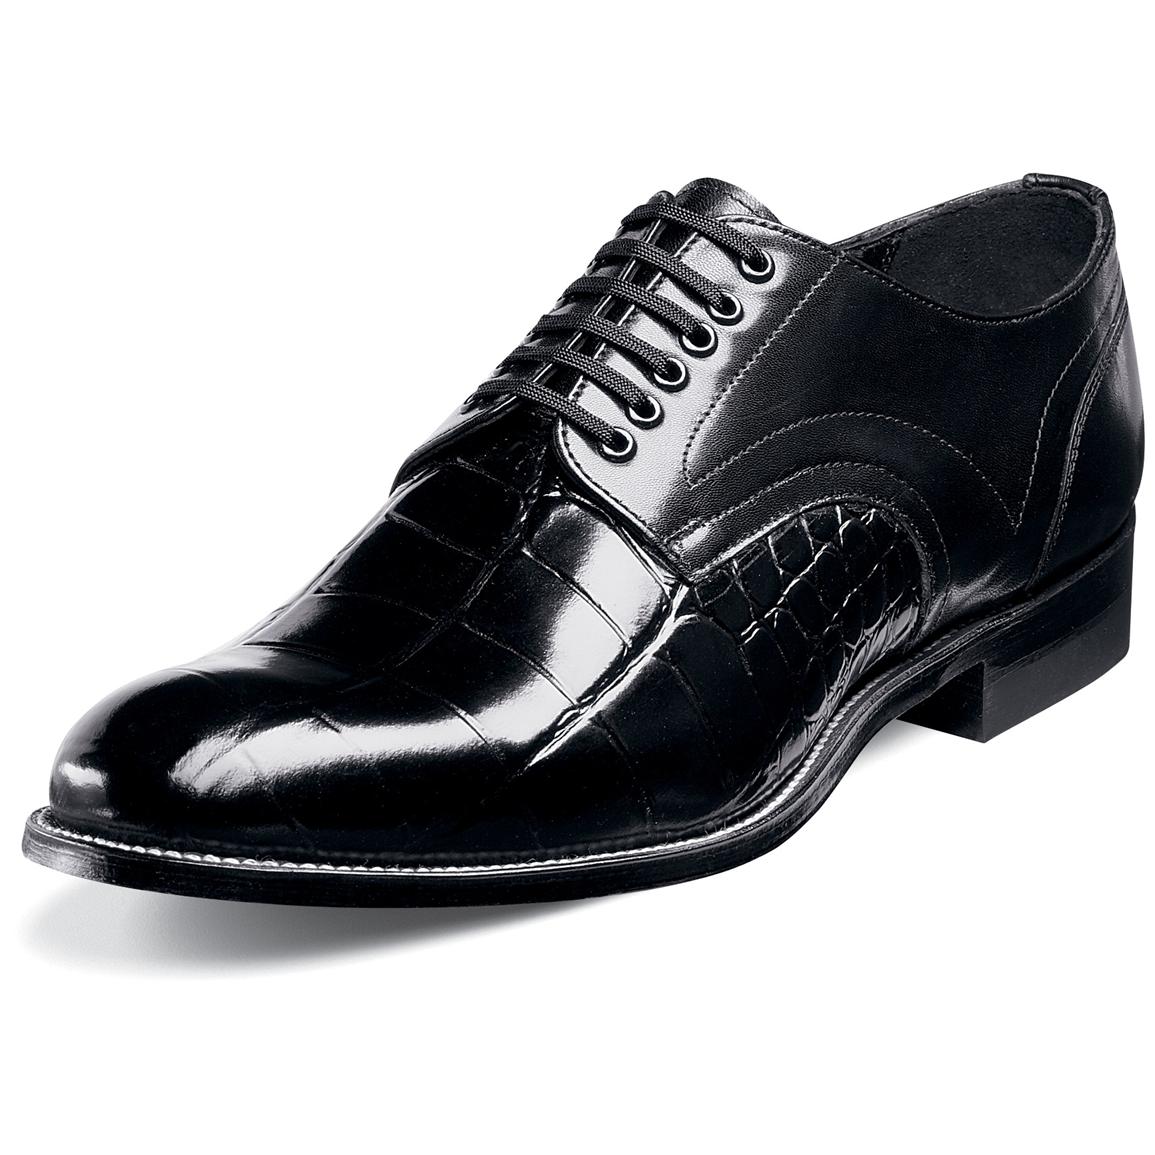 Mens Stacy Adams® Madison Dress Shoes 207426 Dress Shoes At